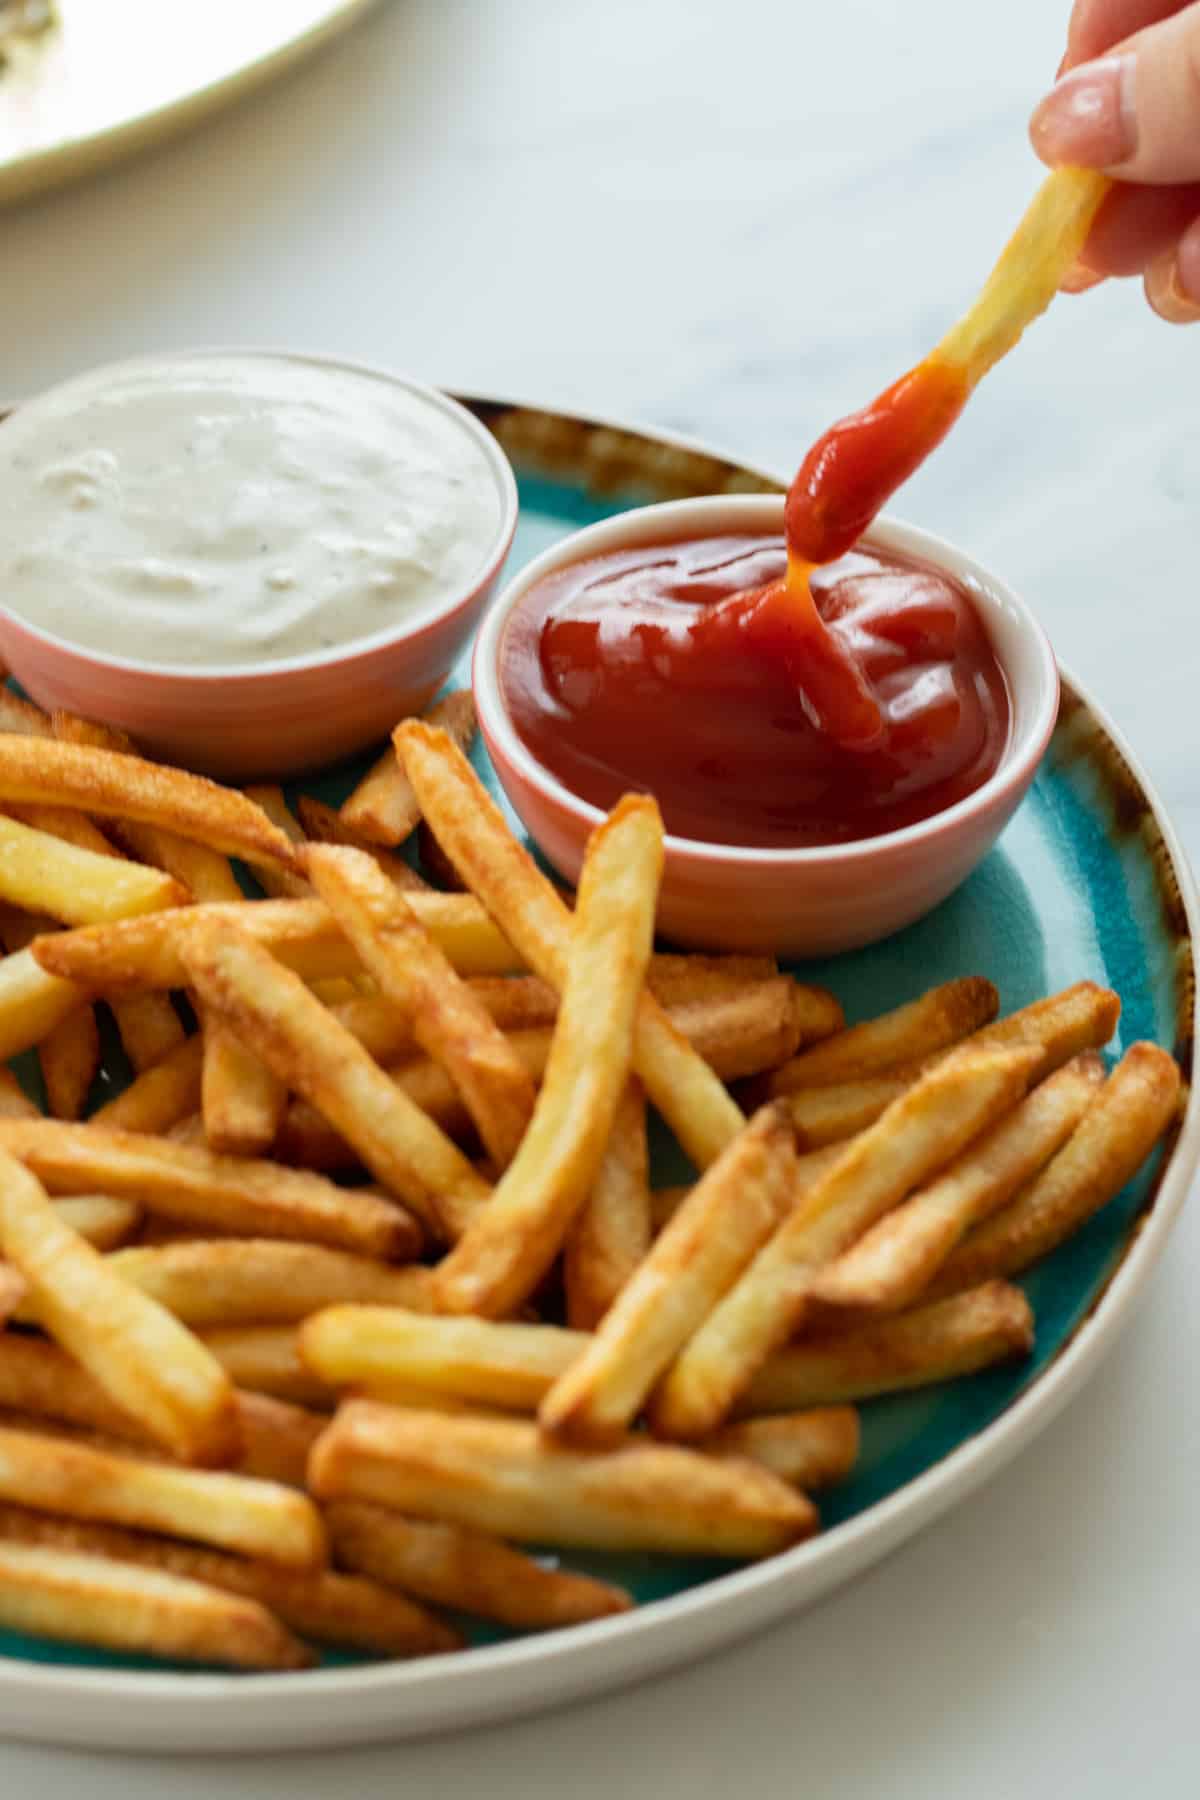 a french fry being dipped in ketchup